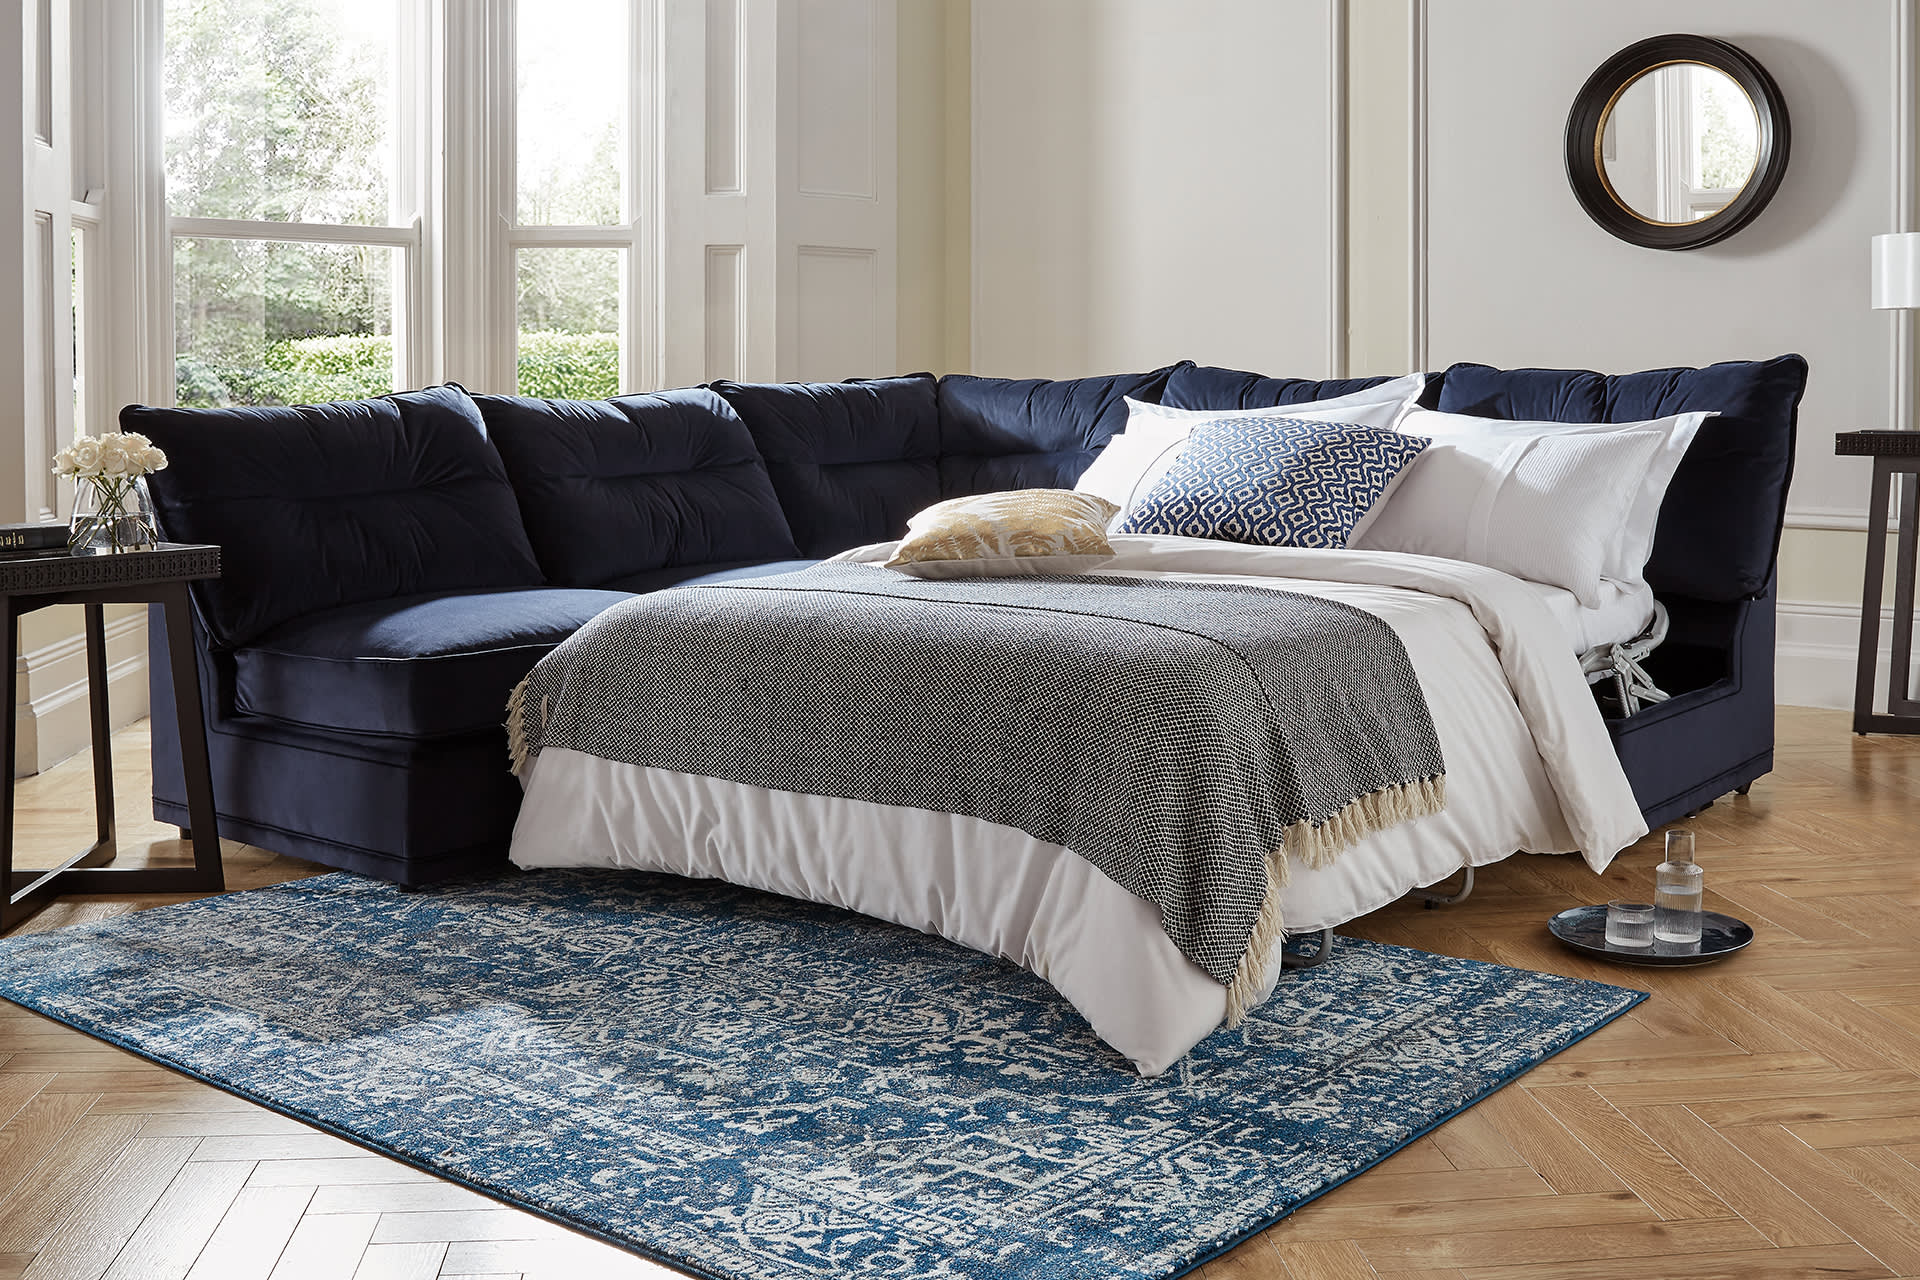 Sofa Beds Buying Guide